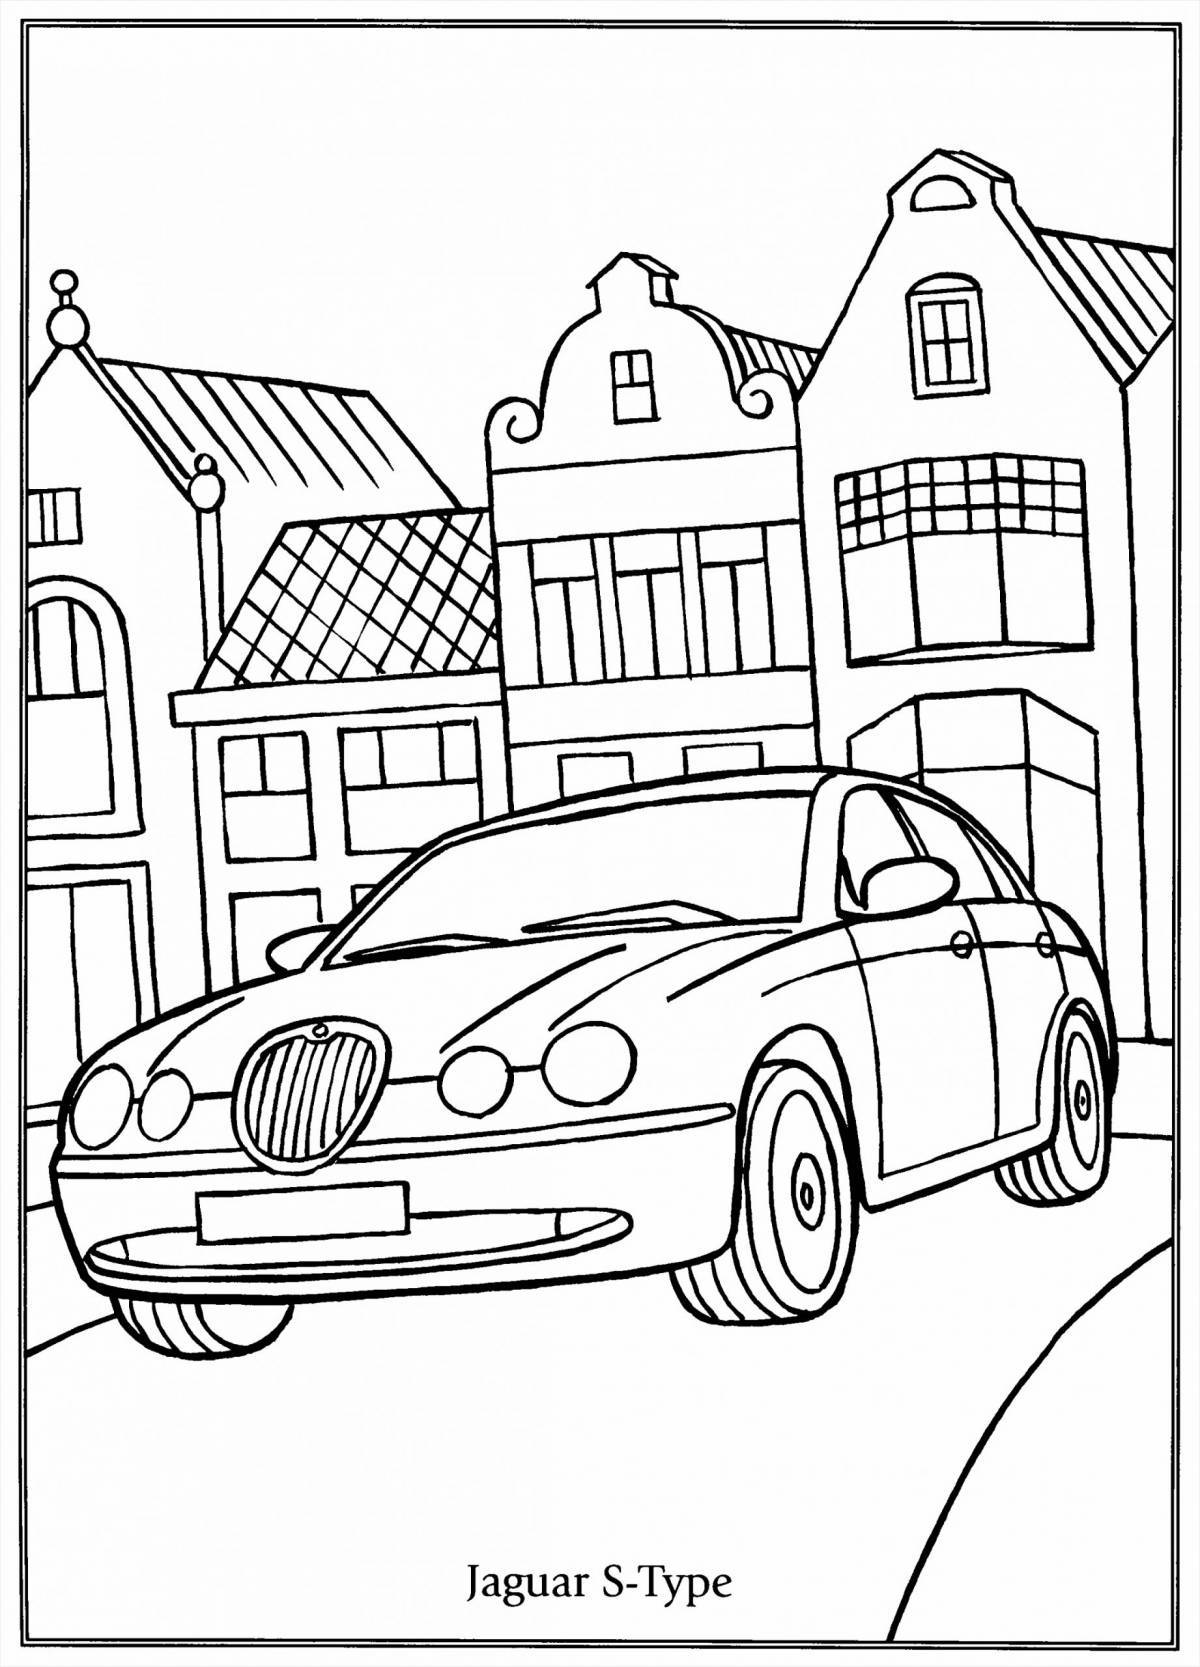 Amazing city cars coloring page